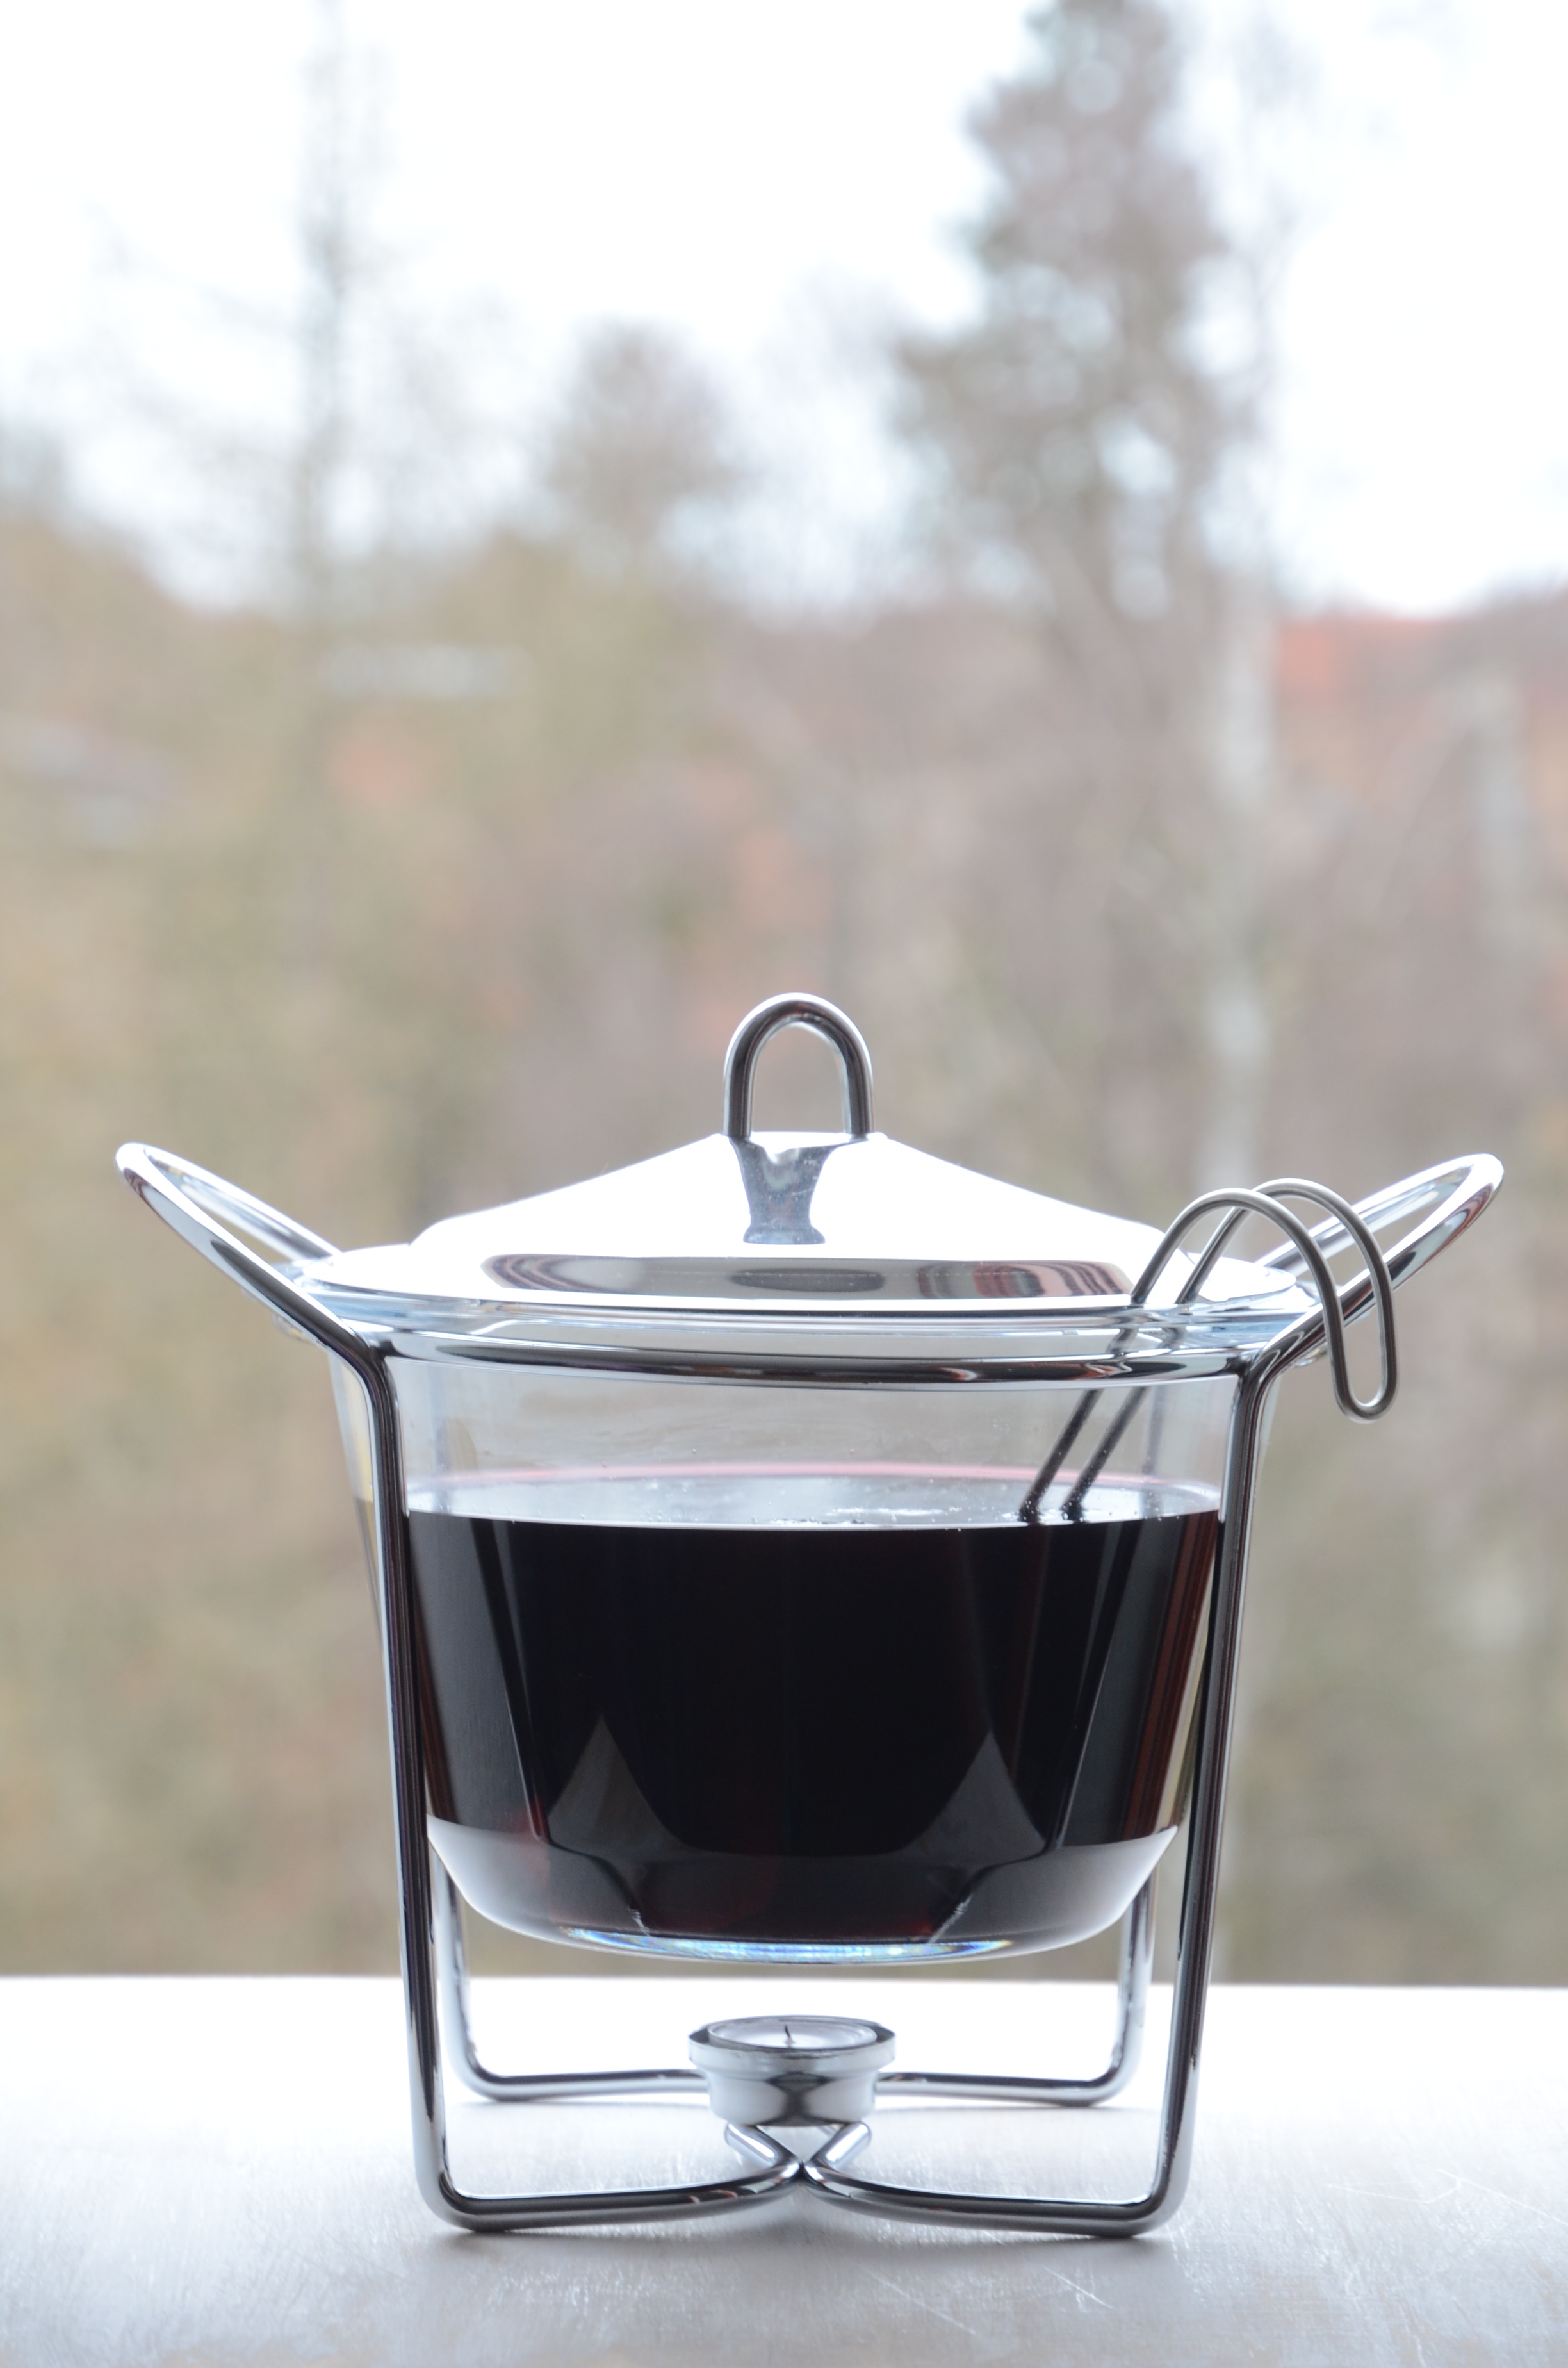 Feuerzangenbowle Recipe and Where to Buy A Feuerzangenbowle Set